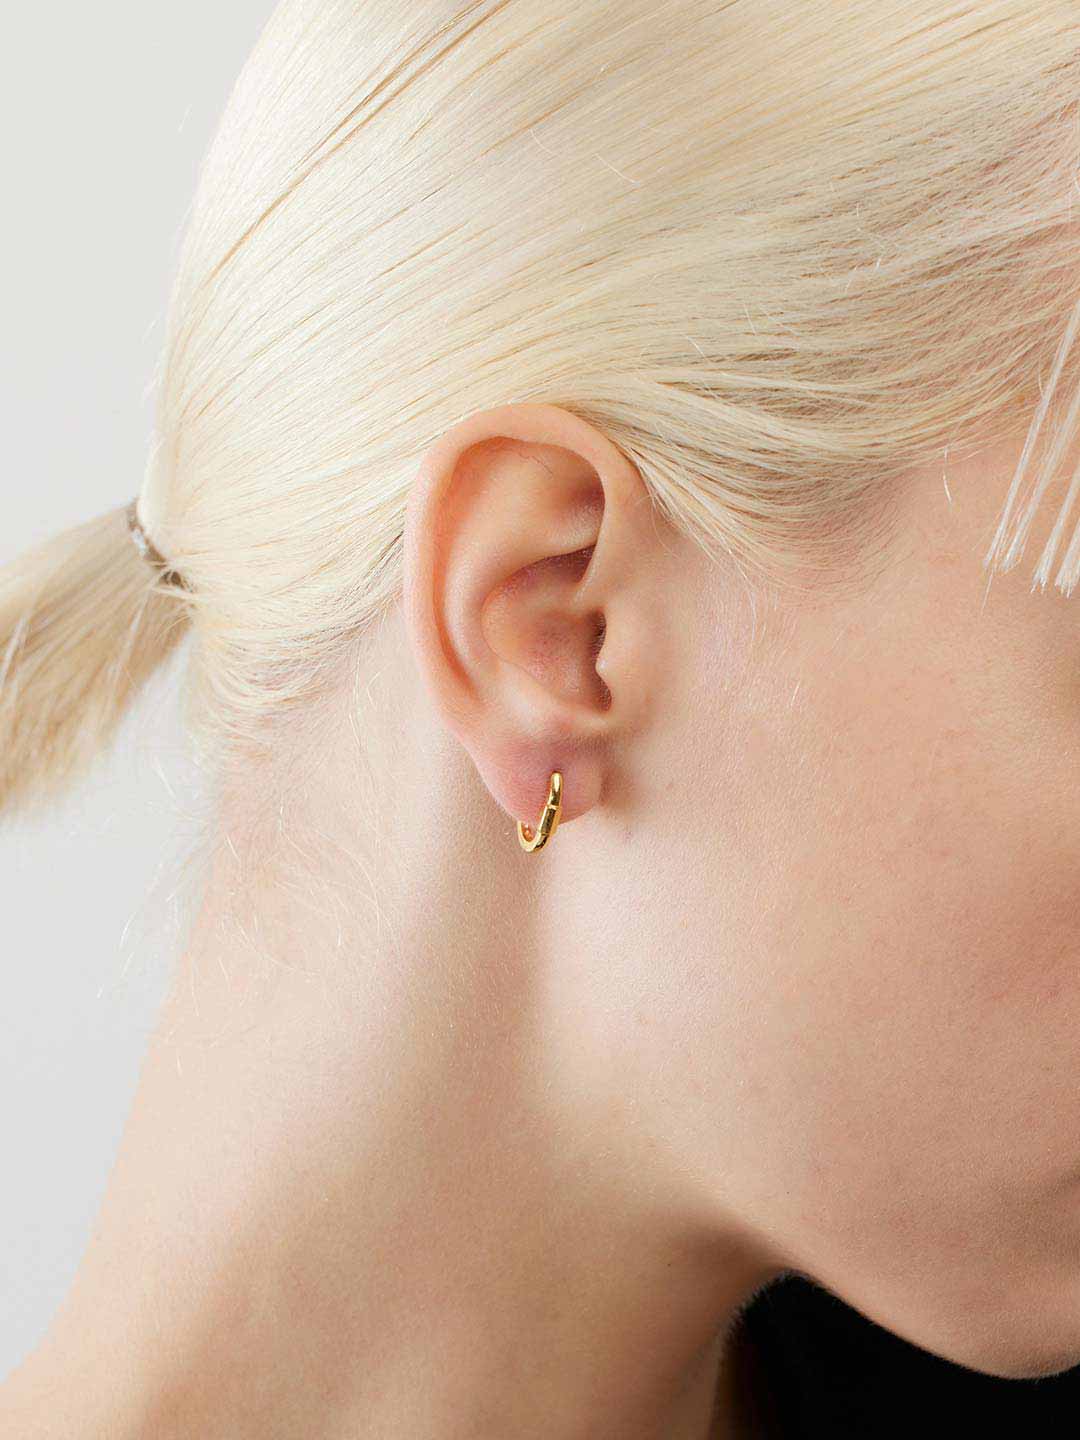 Palads Pierced Earring - Yellow Gold